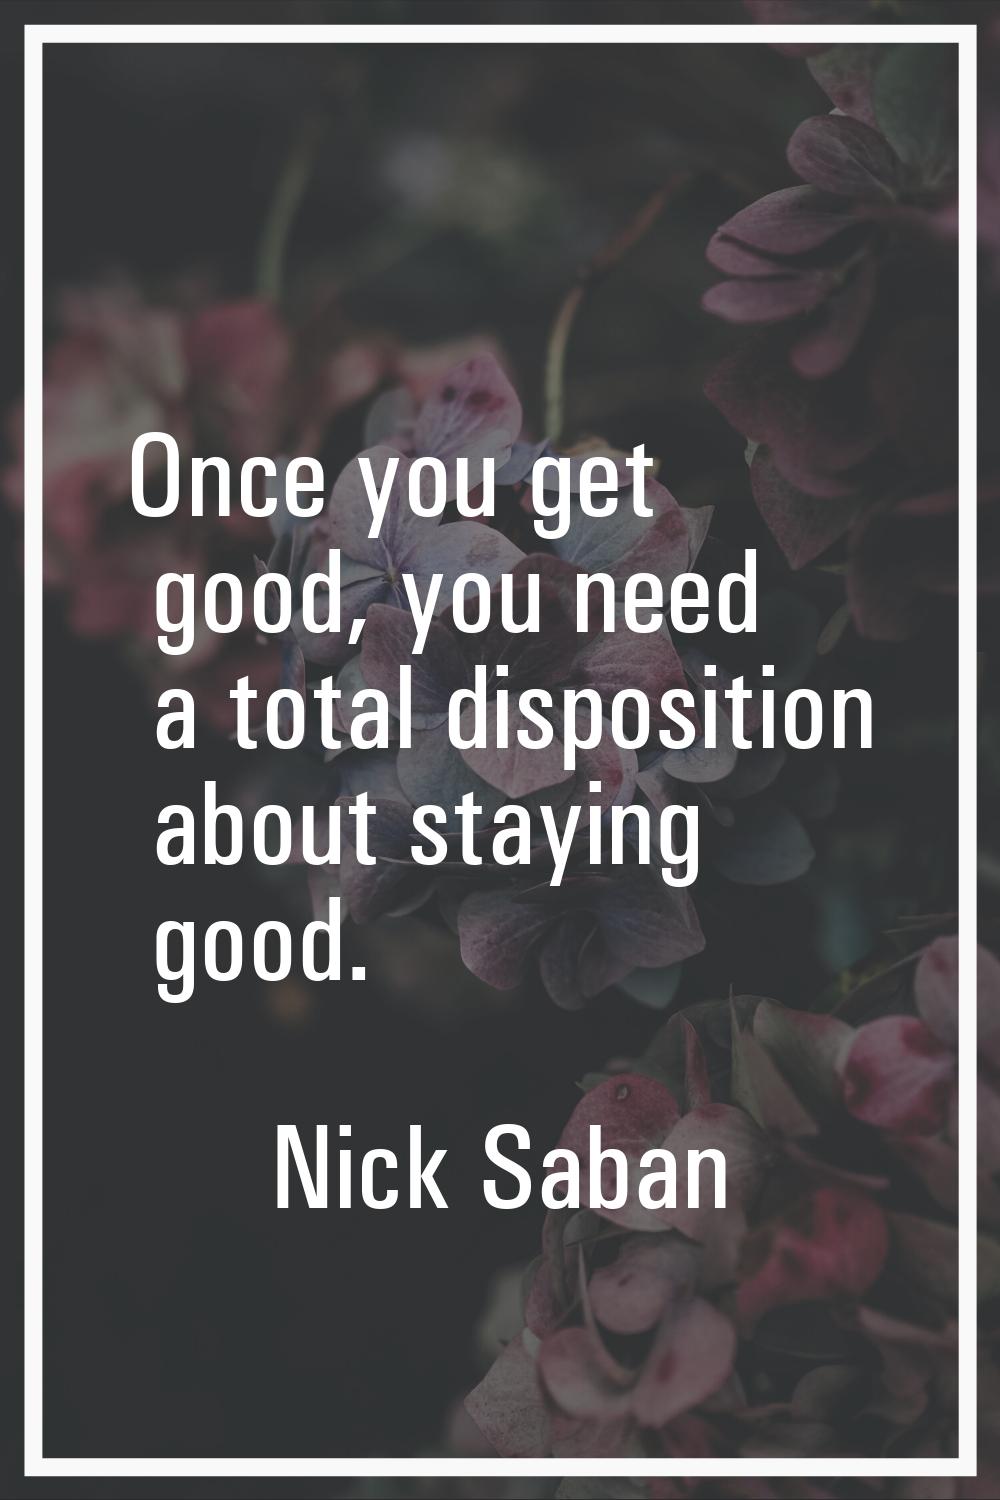 Once you get good, you need a total disposition about staying good.